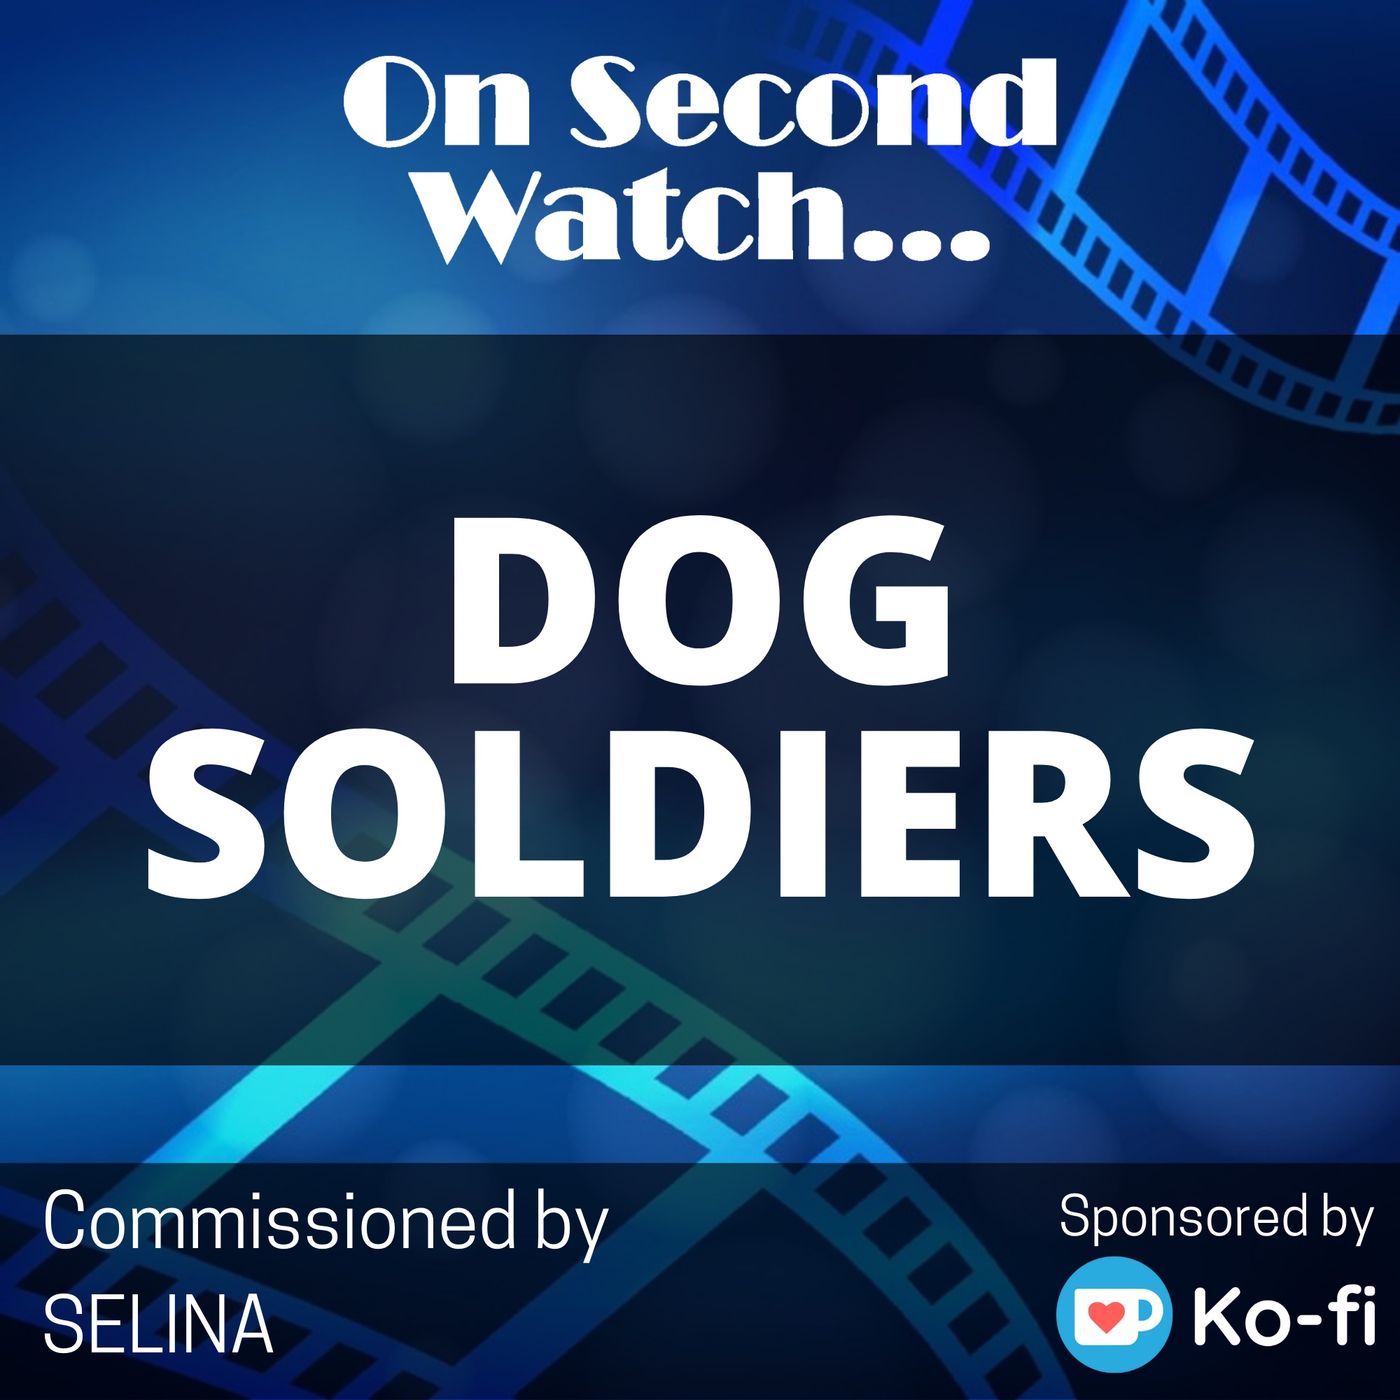 Dog Soldiers (2002) - "My guts are out Coop!"